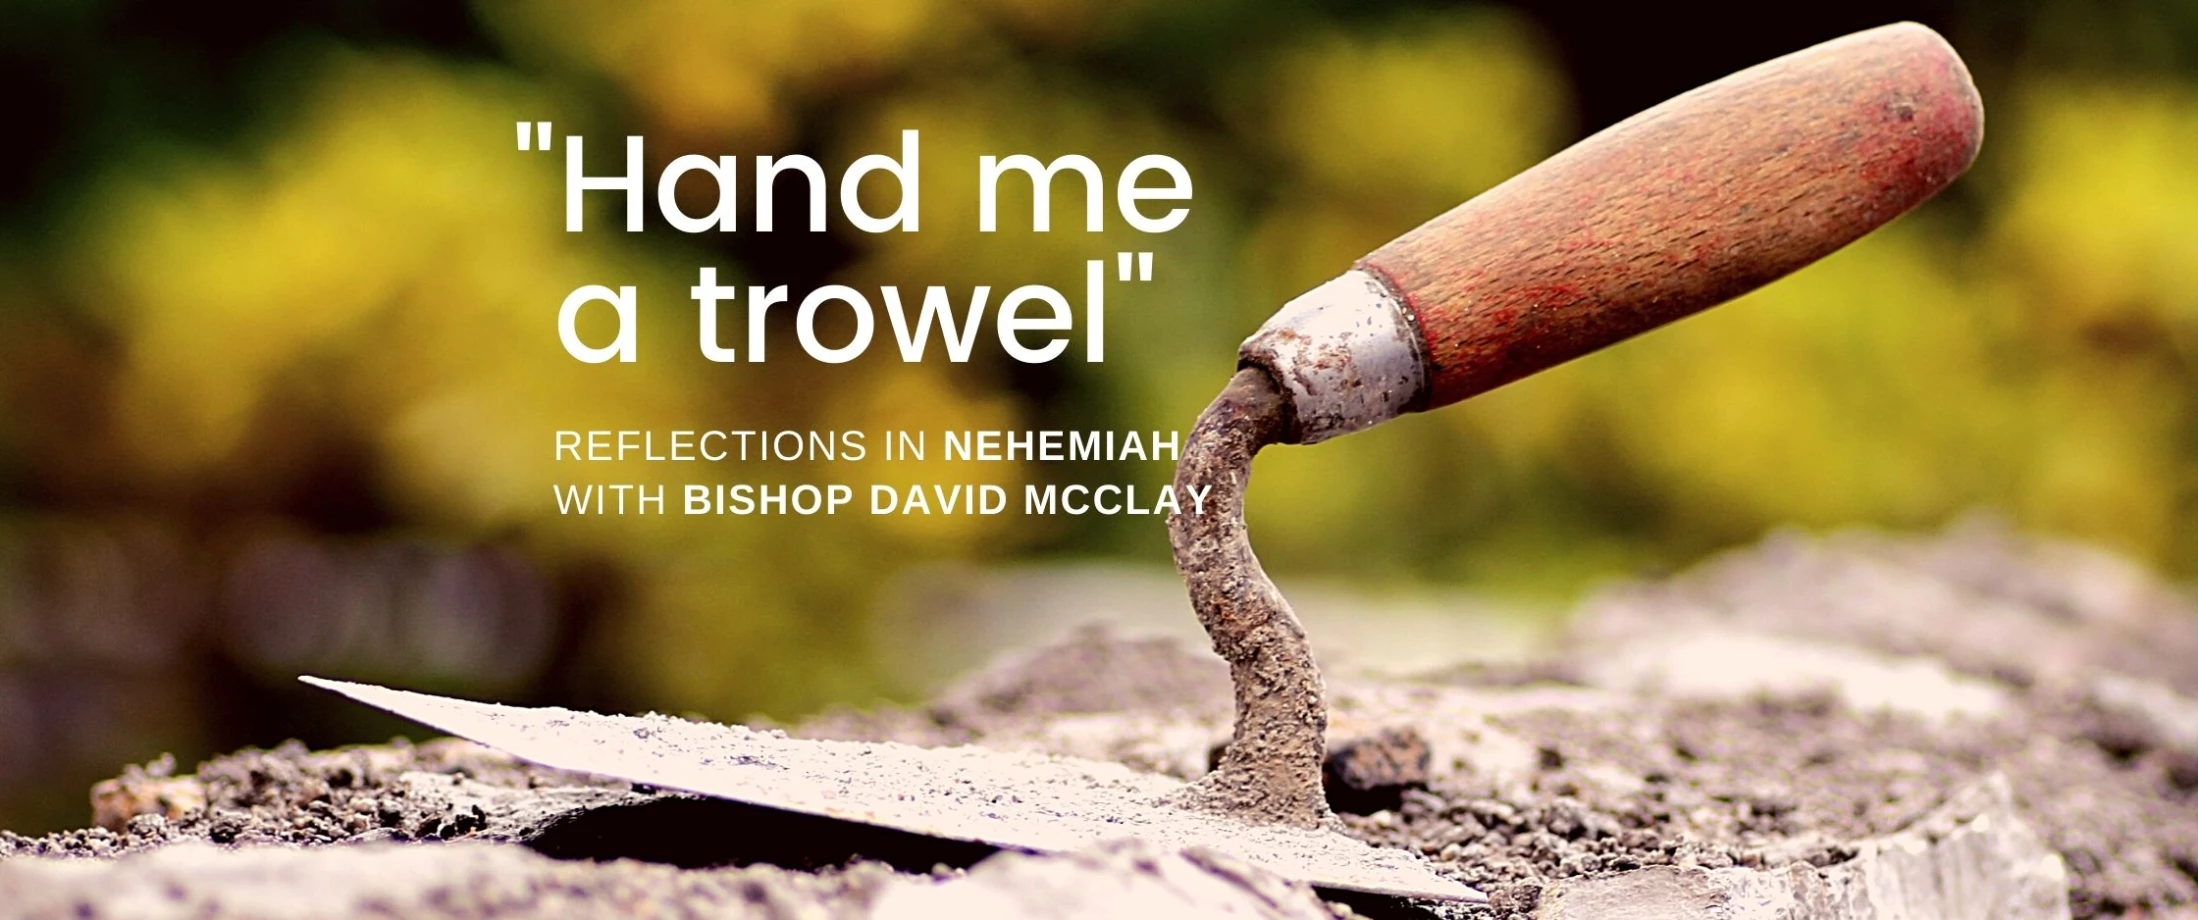 Reflections in Nehemiah for Lent Day 14